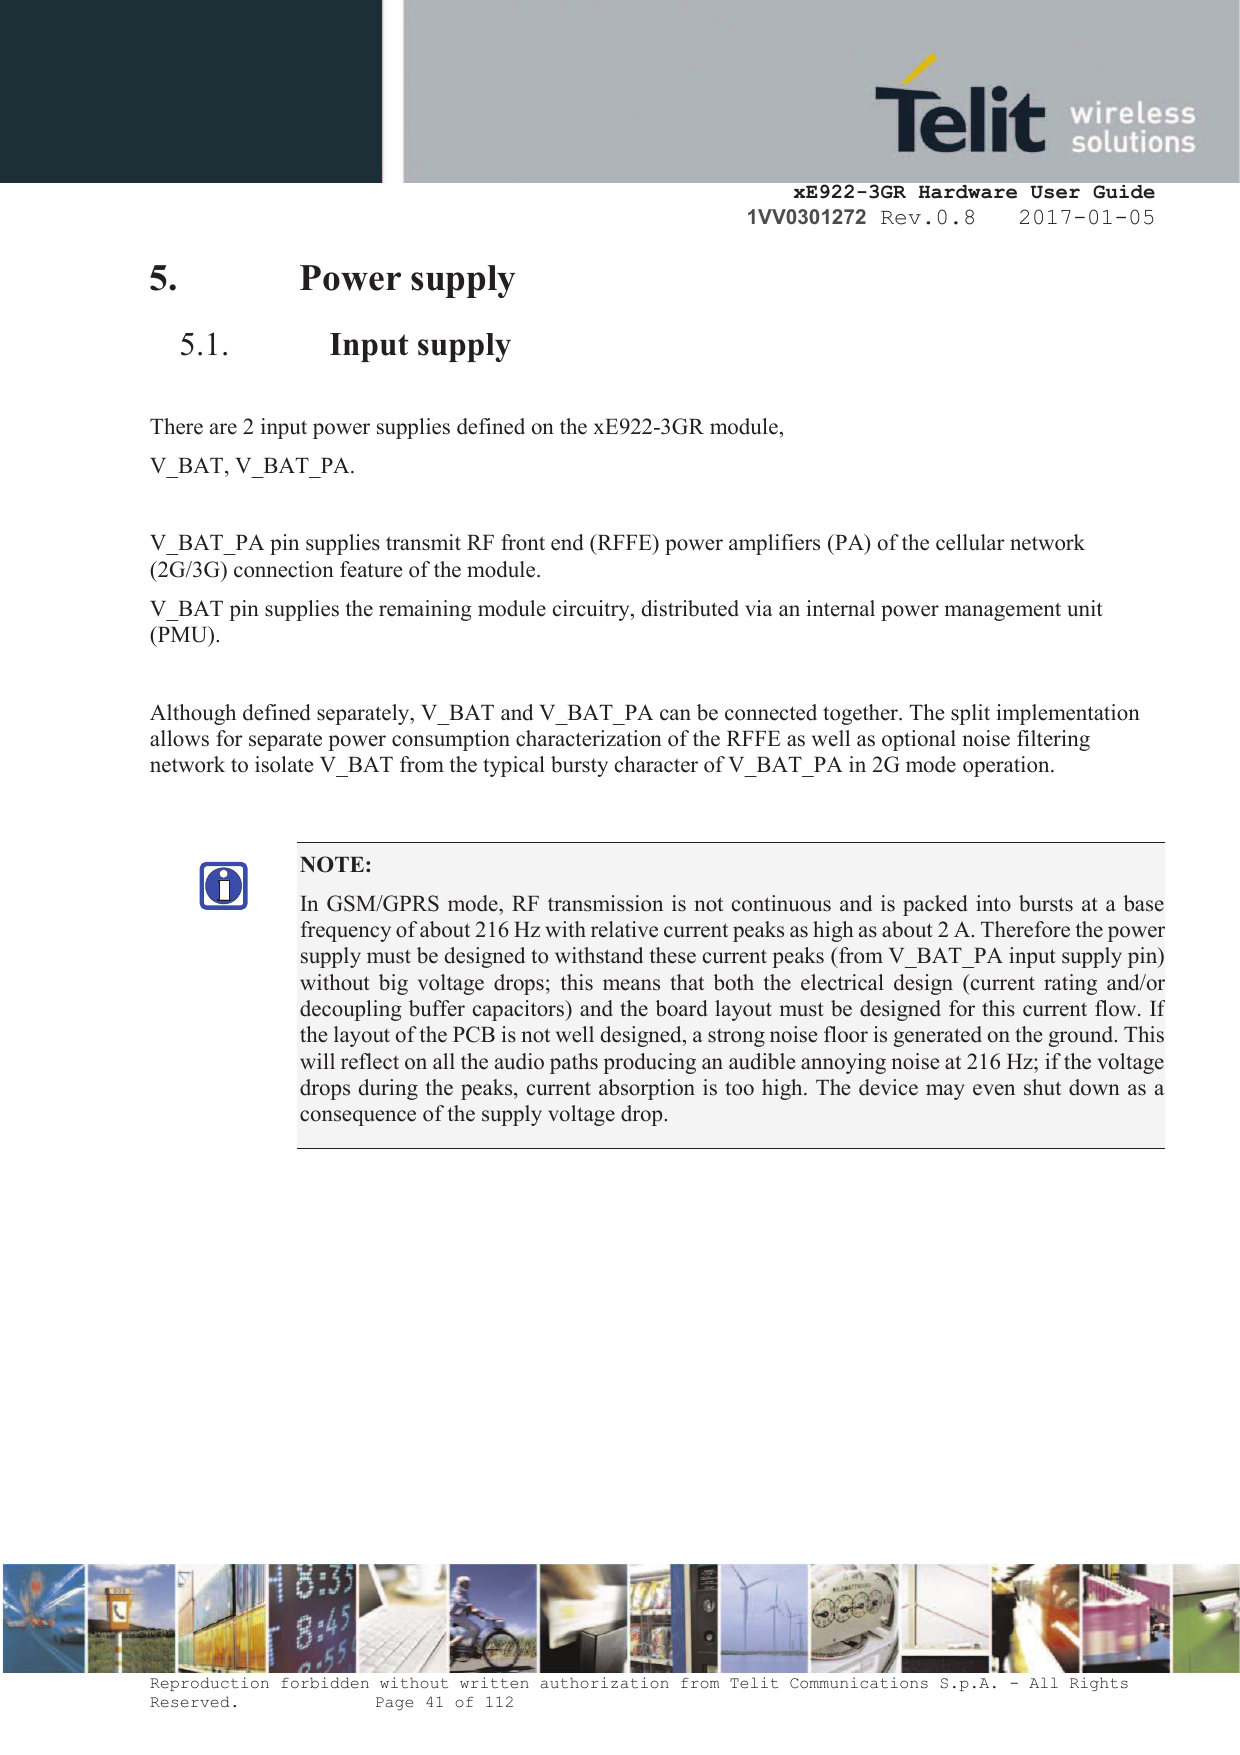     xE922-3GR Hardware User Guide 1VV0301272 Rev.0.8   2017-01-05 Reproduction forbidden without written authorization from Telit Communications S.p.A. - All Rights Reserved.    Page 41 of 112  5. Power supply 5.1. Input supply  There are 2 input power supplies defined on the xE922-3GR module,  V_BAT, V_BAT_PA.  V_BAT_PA pin supplies transmit RF front end (RFFE) power amplifiers (PA) of the cellular network (2G/3G) connection feature of the module.  V_BAT pin supplies the remaining module circuitry, distributed via an internal power management unit (PMU).  Although defined separately, V_BAT and V_BAT_PA can be connected together. The split implementation allows for separate power consumption characterization of the RFFE as well as optional noise filtering network to isolate V_BAT from the typical bursty character of V_BAT_PA in 2G mode operation.    NOTE: In GSM/GPRS mode, RF transmission is not continuous and is packed into bursts at a base frequency of about 216 Hz with relative current peaks as high as about 2 A. Therefore the power supply must be designed to withstand these current peaks (from V_BAT_PA input supply pin) without  big  voltage  drops;  this  means  that  both  the  electrical  design (current rating  and/or decoupling buffer capacitors) and the board layout must be designed for this current flow. If the layout of the PCB is not well designed, a strong noise floor is generated on the ground. This will reflect on all the audio paths producing an audible annoying noise at 216 Hz; if the voltage drops during the peaks, current absorption is too high. The device may even shut down as a consequence of the supply voltage drop.  